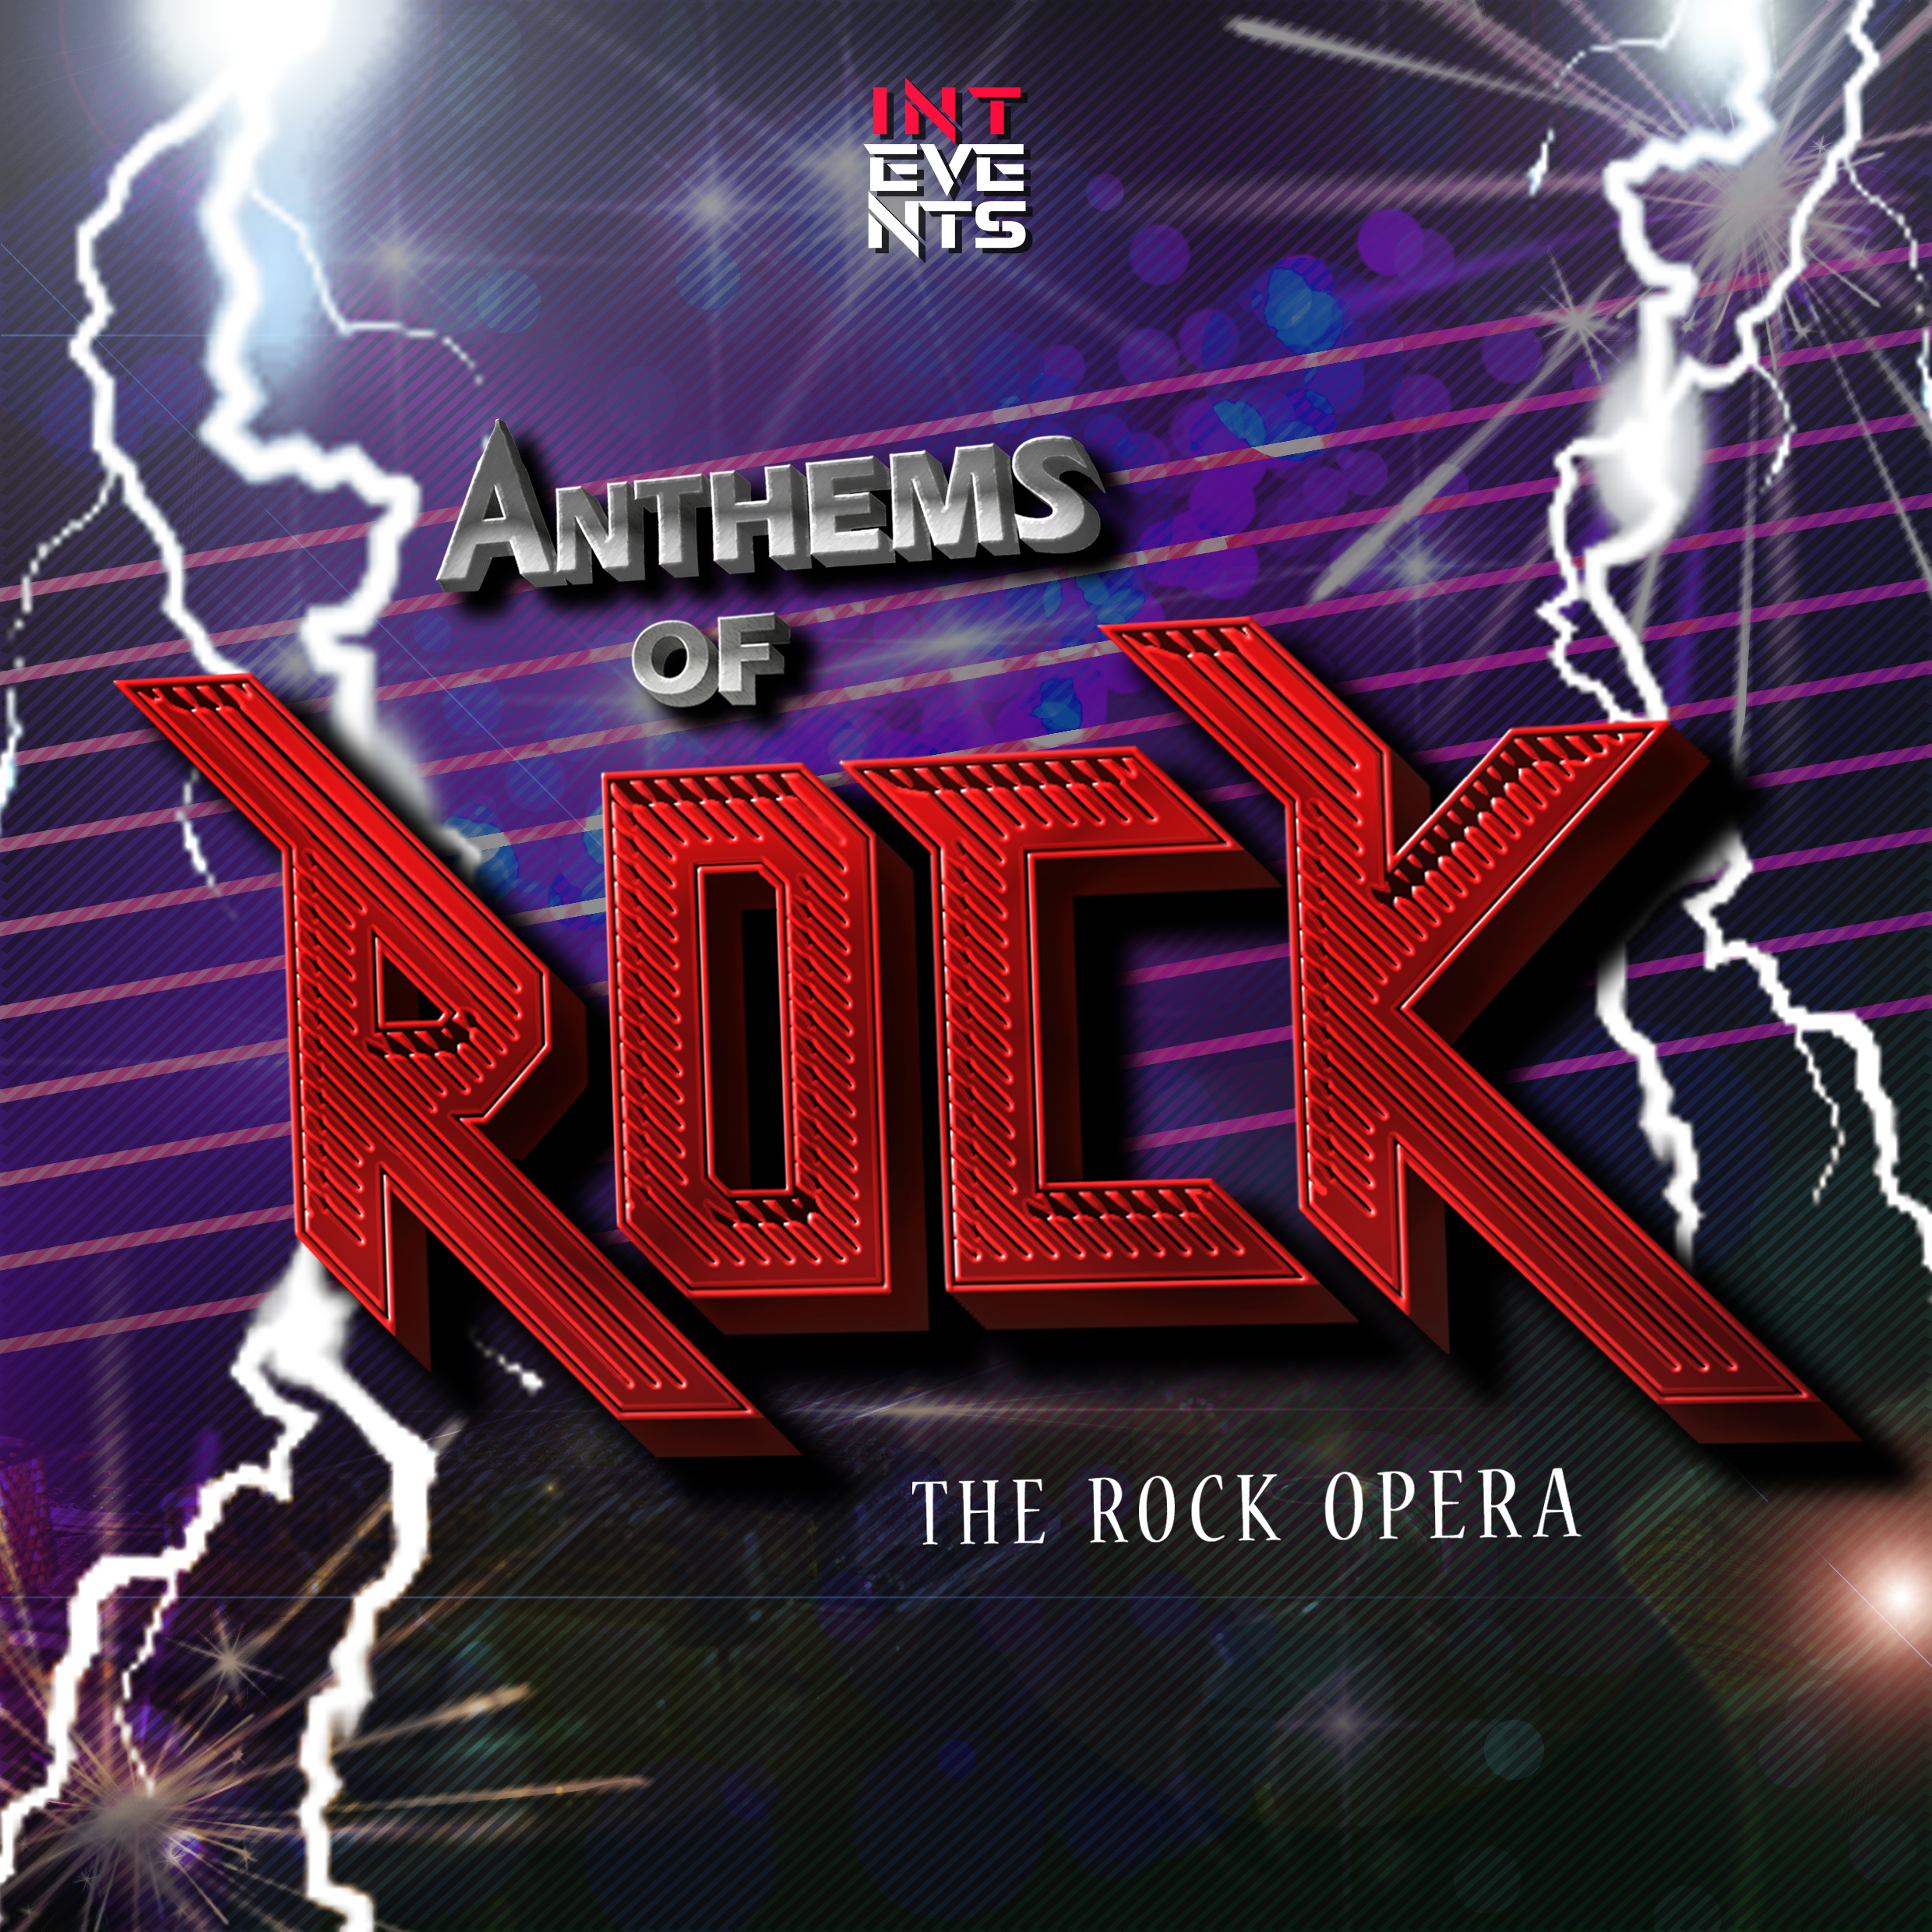 Anthems of Rock - Penrith